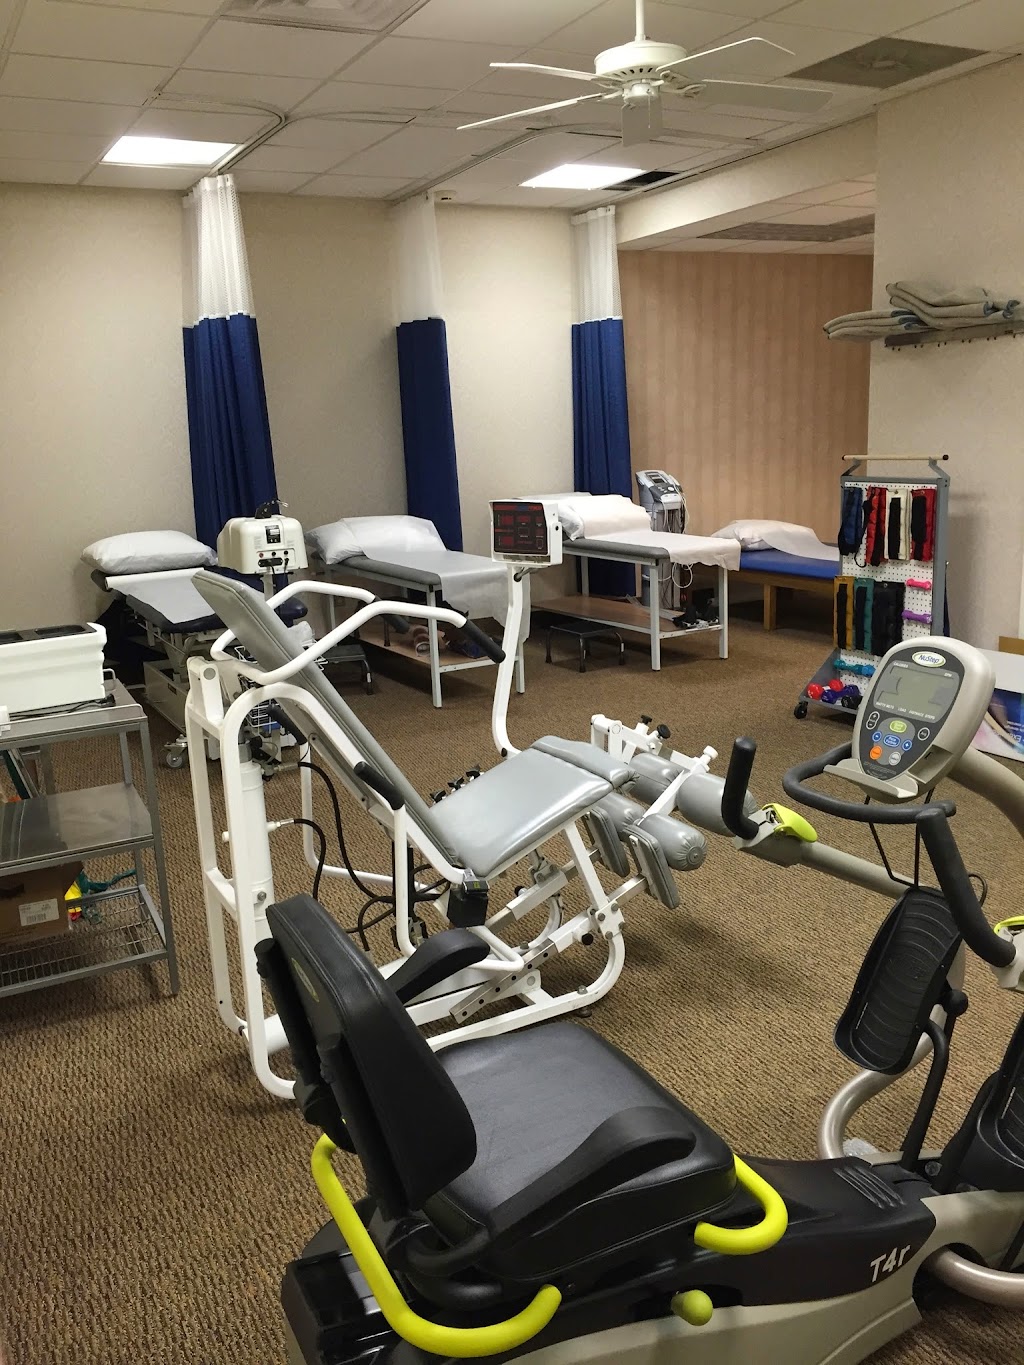 Quality Care Physical Therapy & Rehab Center | 415 Avenel St, Avenel, NJ 07001 | Phone: (732) 203-7000